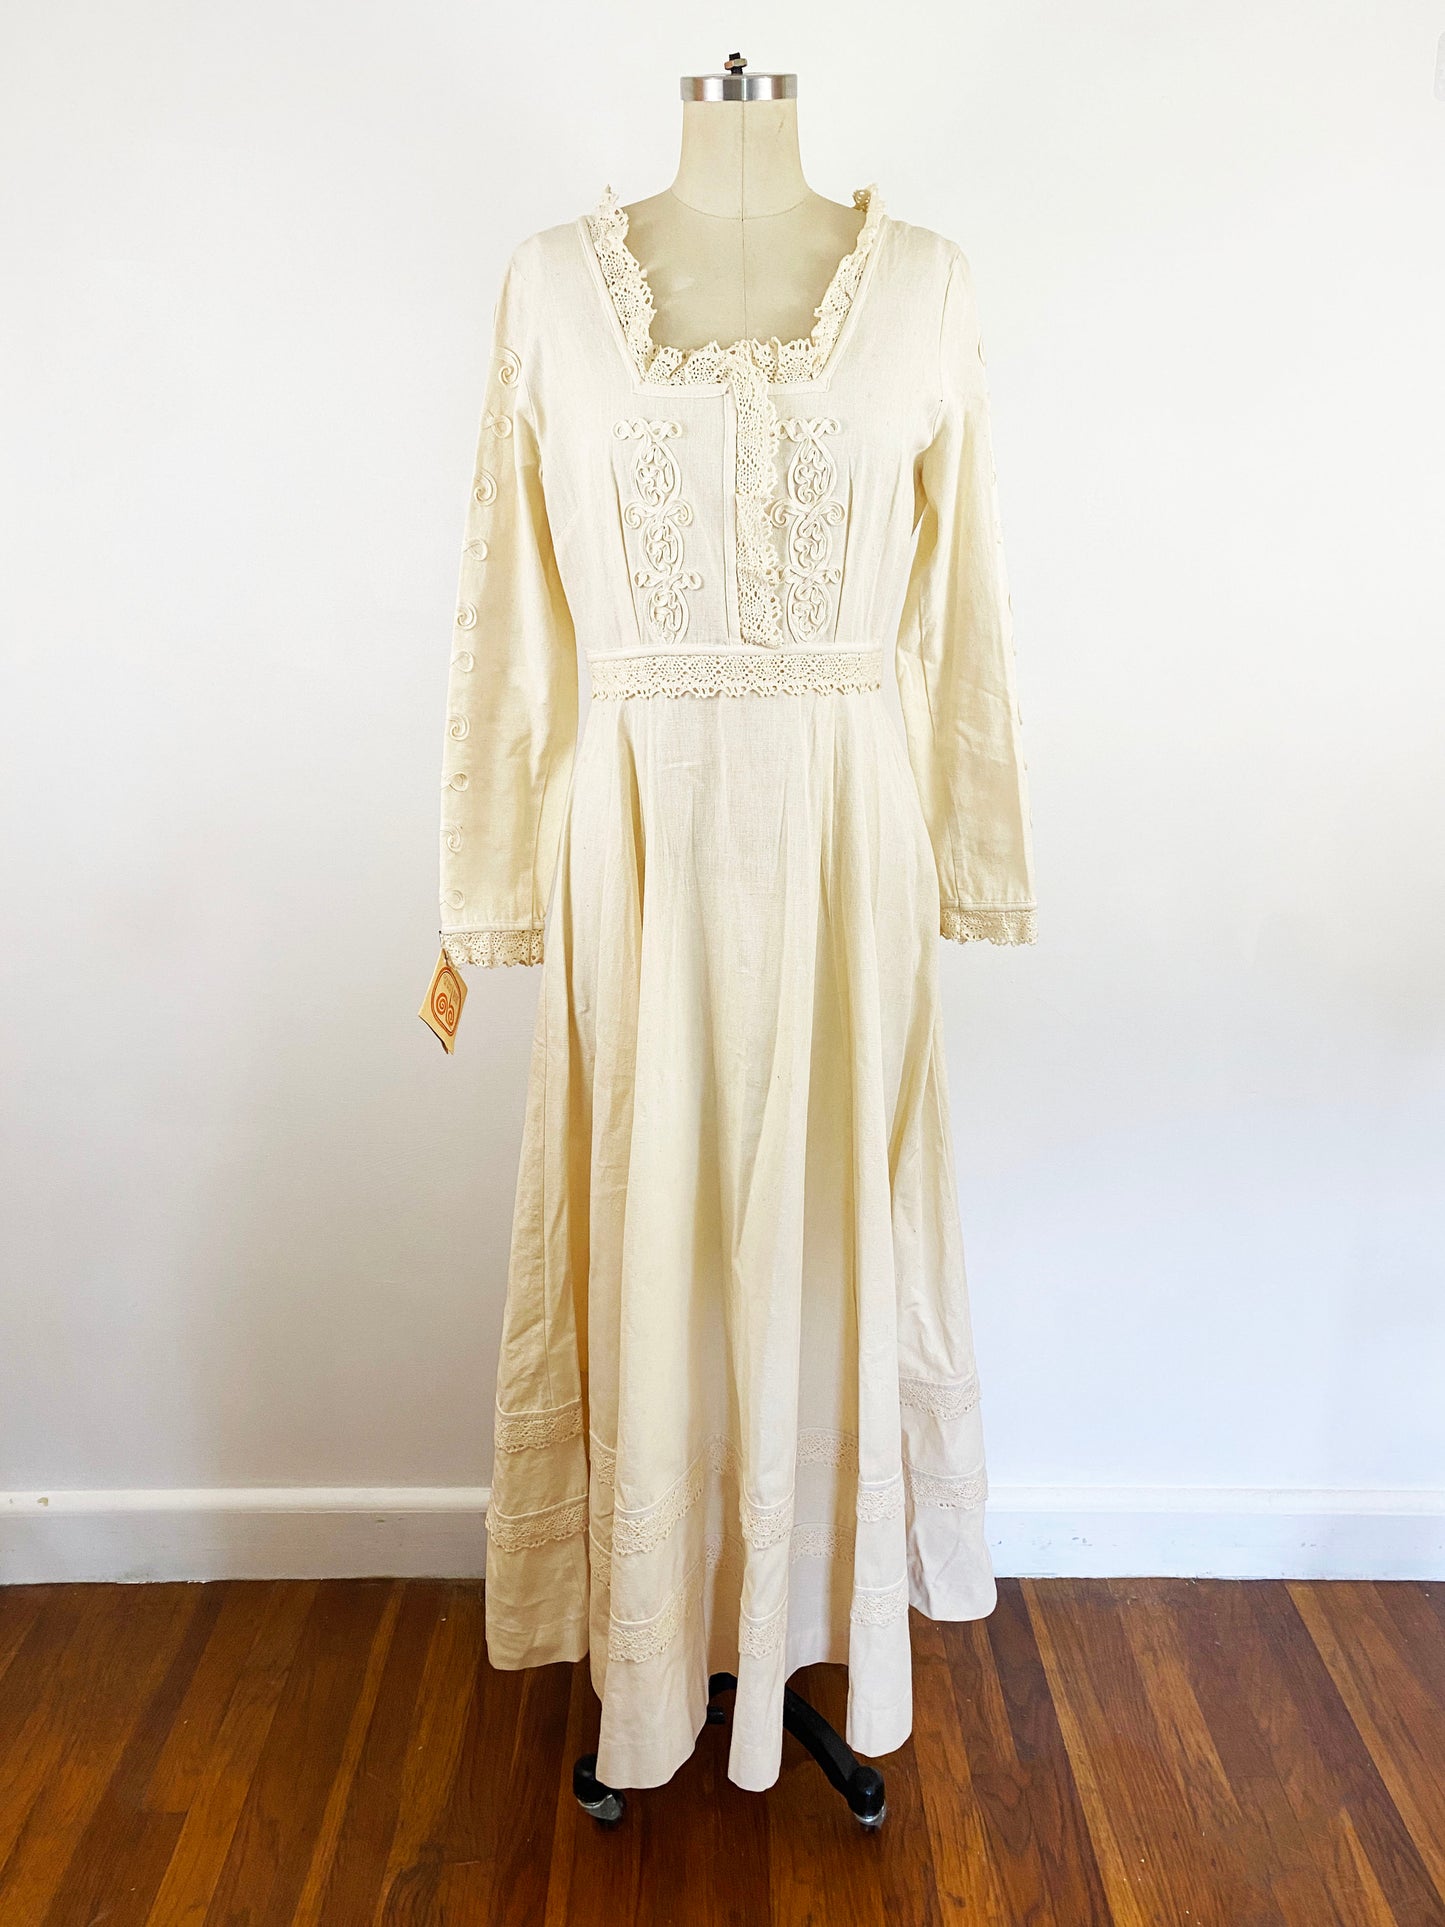 1970s Girasol by Gonzalo Bauer Natural Cotton Cream Lace and Embroidered Long Sleeve Maxi Prairie Dress Mexican Wedding Dress / Medium 10